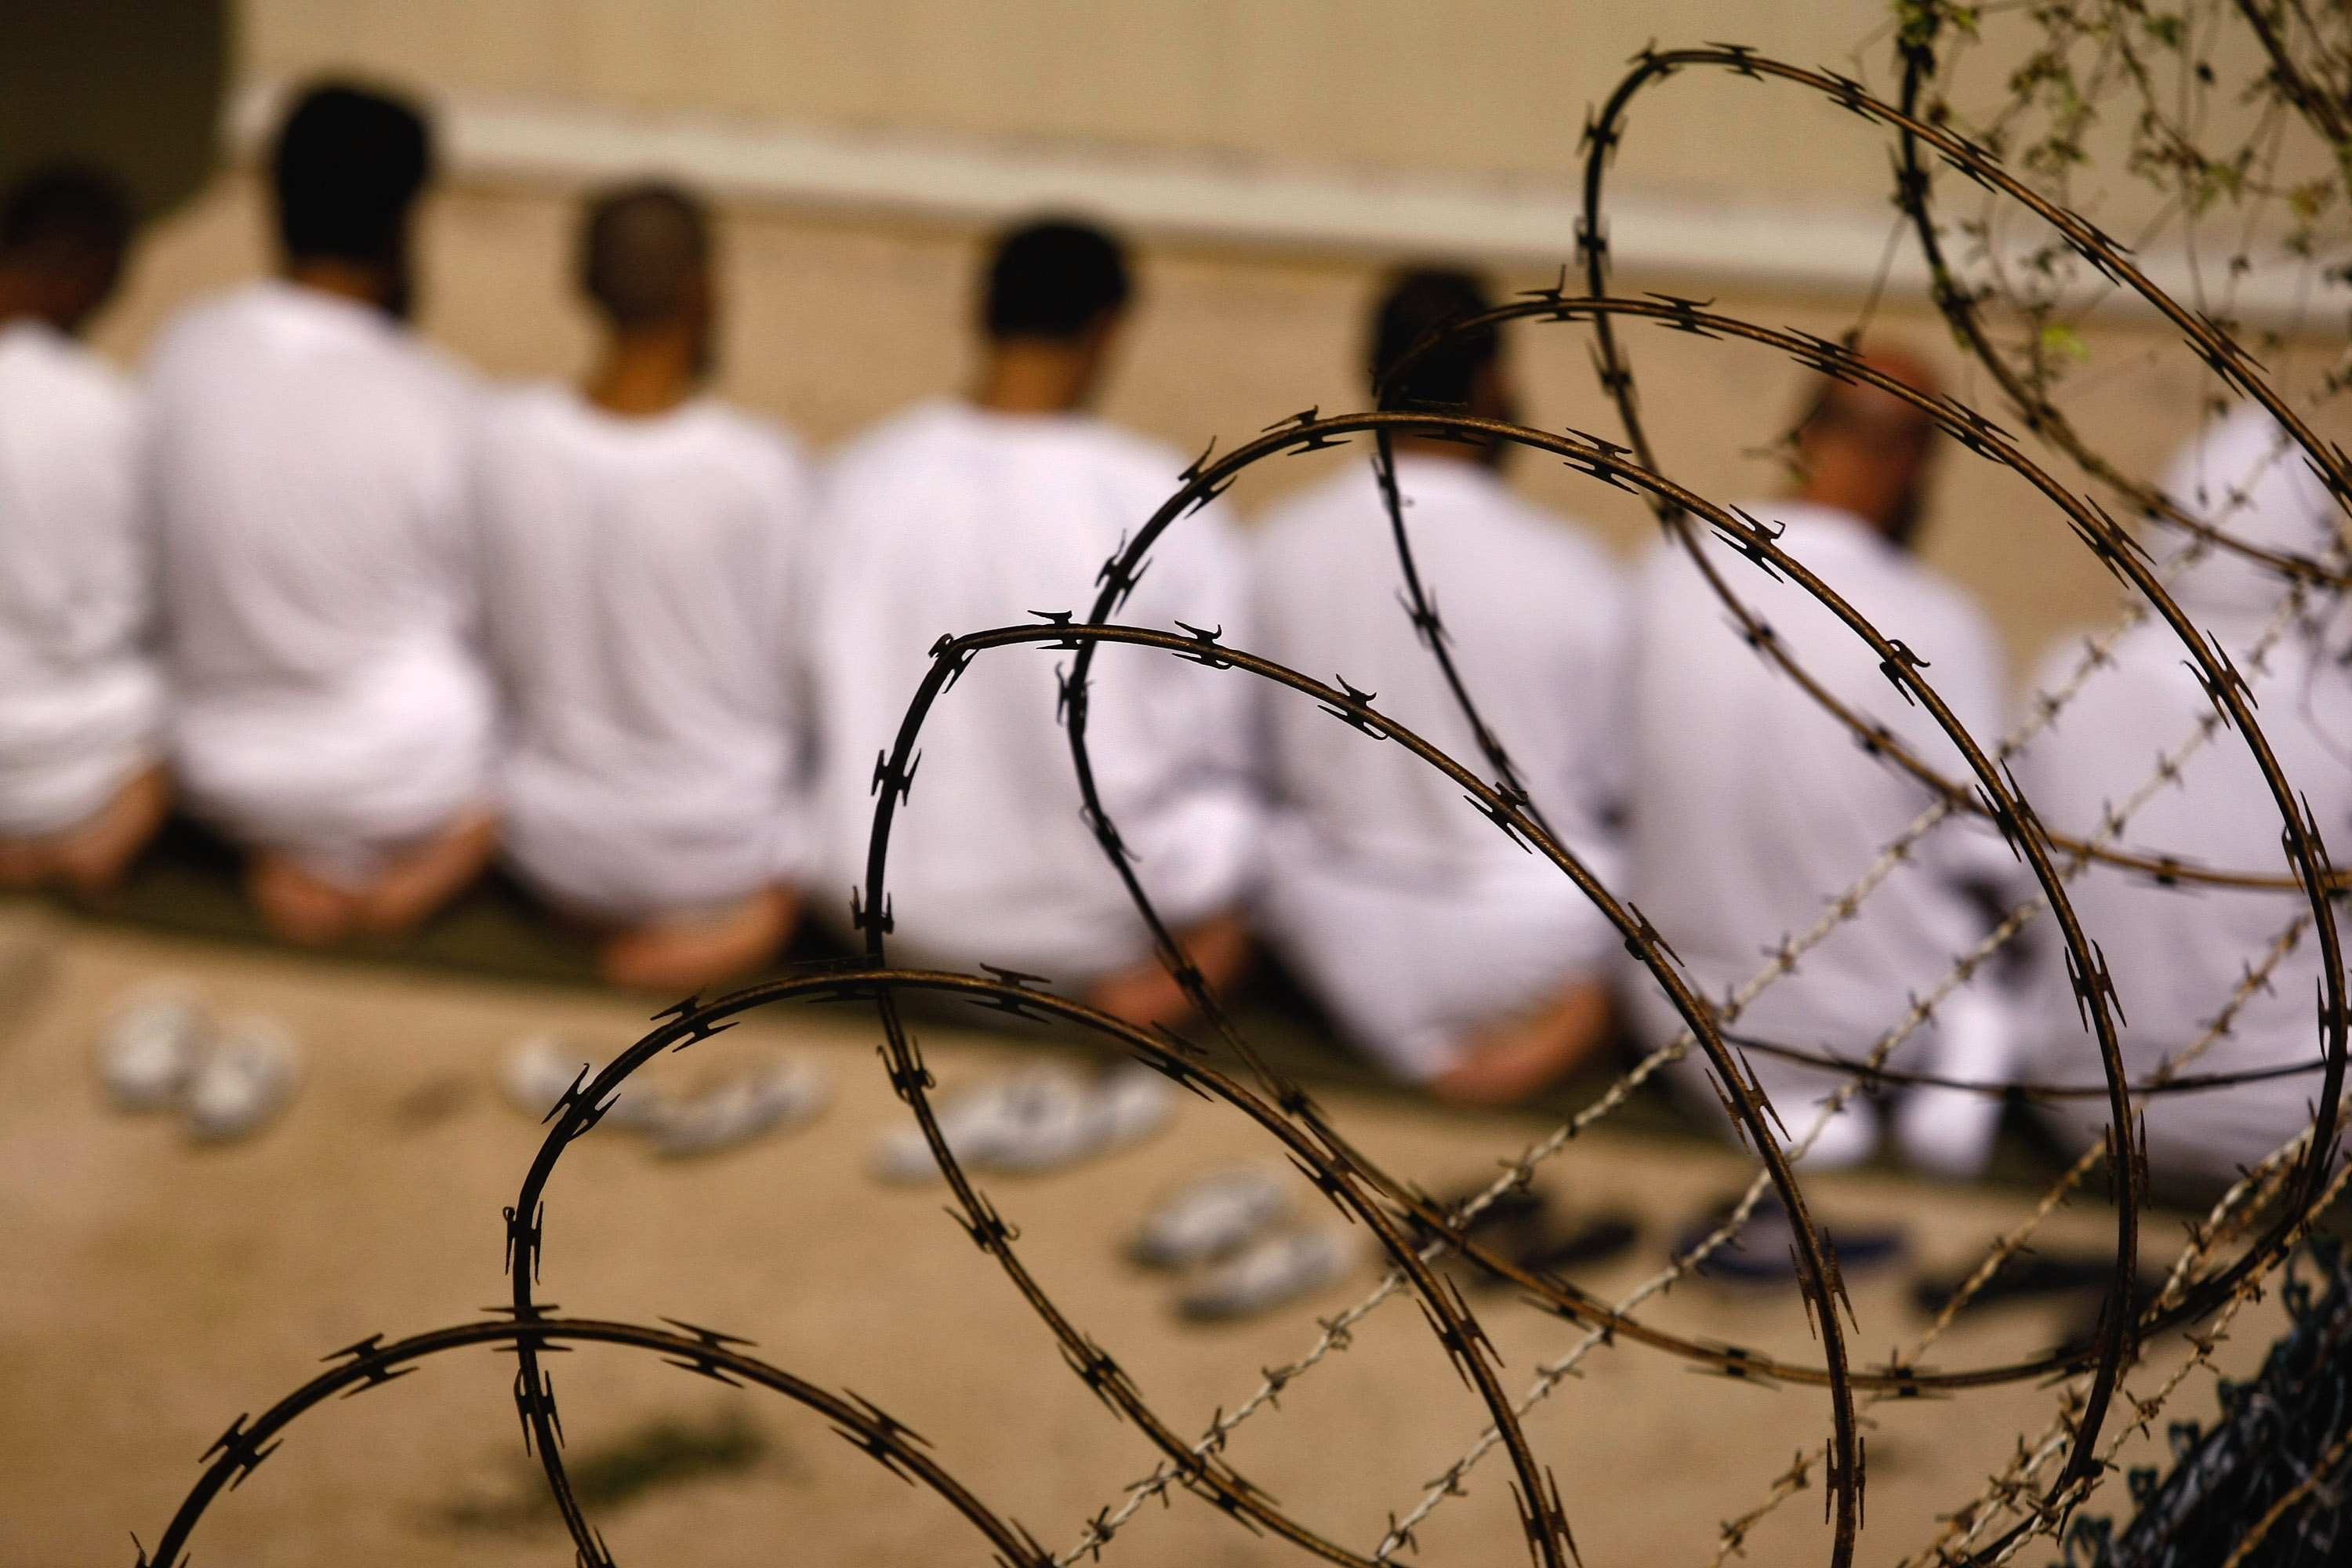 GUANTANAMO BAY, CUBA - OCTOBER 28: (EDITORS NOTE: Image has been reviewed by U.S. Military prior to transmission)  A group of detainees kneels during an early morning Islamic prayer in their camp at the U.S. military prison for "enemy combatants" on October 28, 2009 in Guantanamo Bay, Cuba. Although U.S. President Barack Obama pledged in his first executive order last January to close the infamous prison within a year's time, the government has been struggling to try the accused terrorists and to transfer them out ahead of the deadline. Military officials at the prison point to improved living standards and state of the art medical treatment available to detainees, but the facility's international reputation remains tied to the "enhanced interrogation techniques" such as waterboarding employed under the Bush administration. (Photo by John Moore/Getty Images)